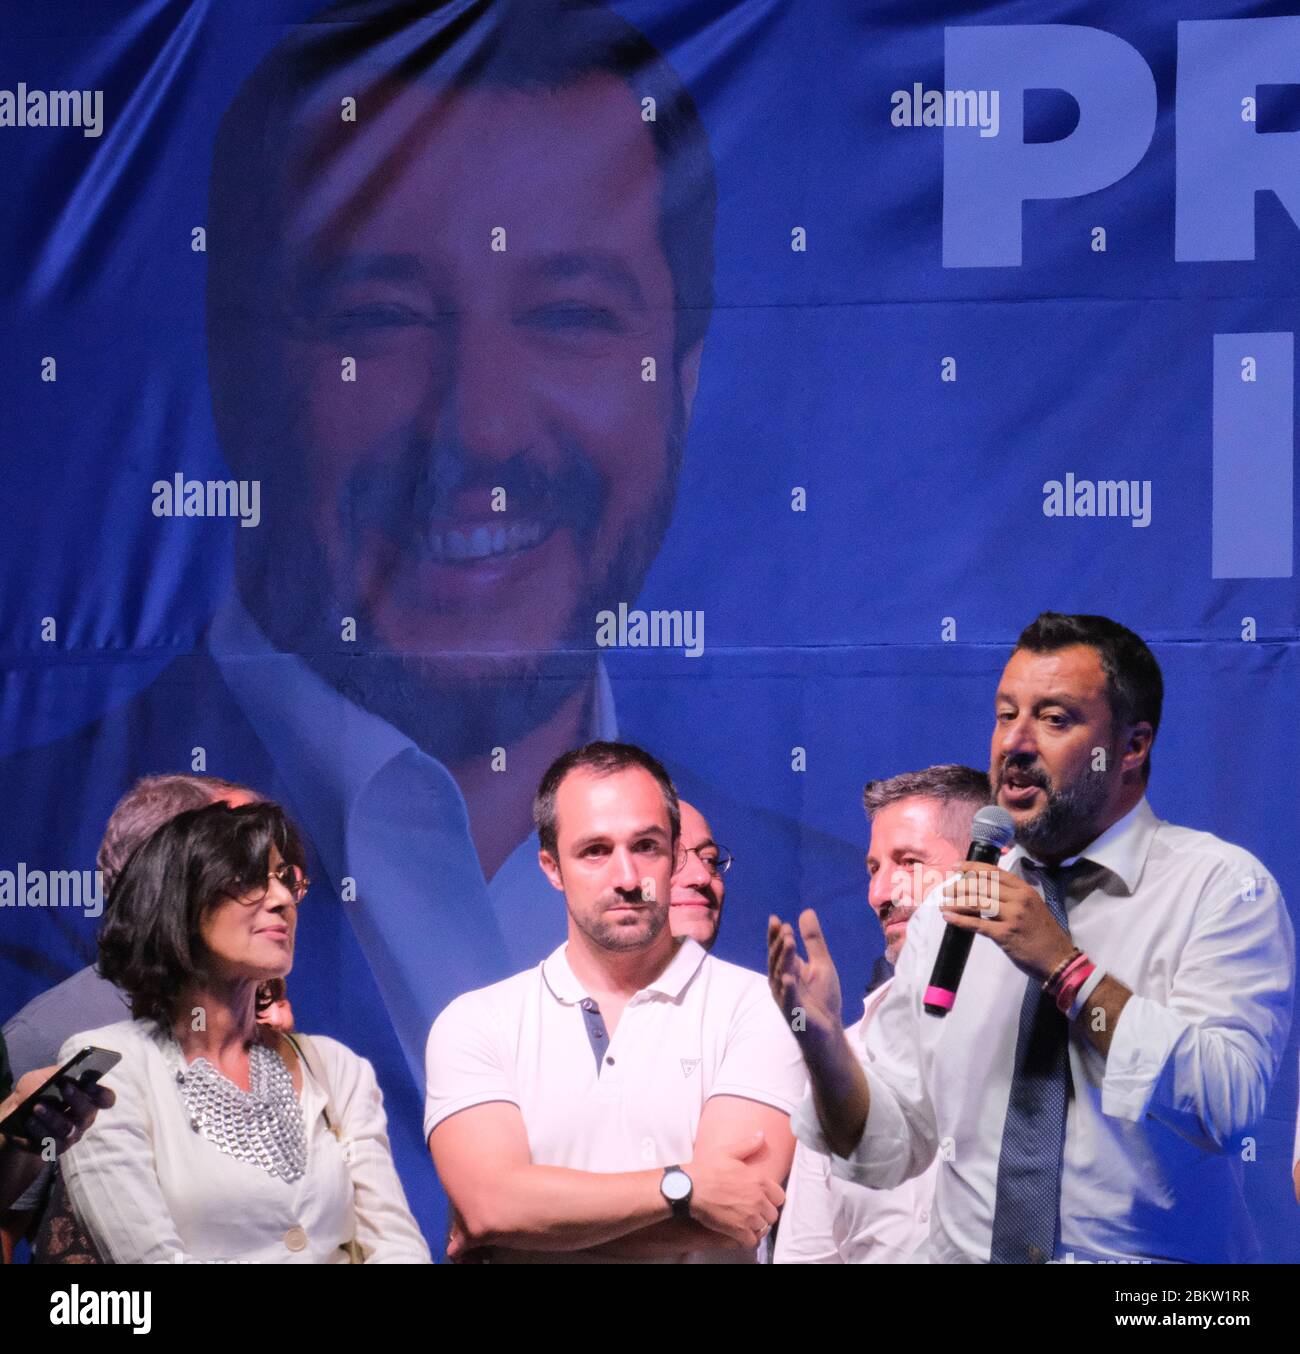 Matteo Salvini conducts a La Lega rally in Sabaudia, south of Rome. He speaks about immigration, traditional Italian values, globalisation and identity. The town's inhabitants are not traditional La Lega voters but Salvini's presence brought out a curious, if not sceptical, crowd. Stock Photo